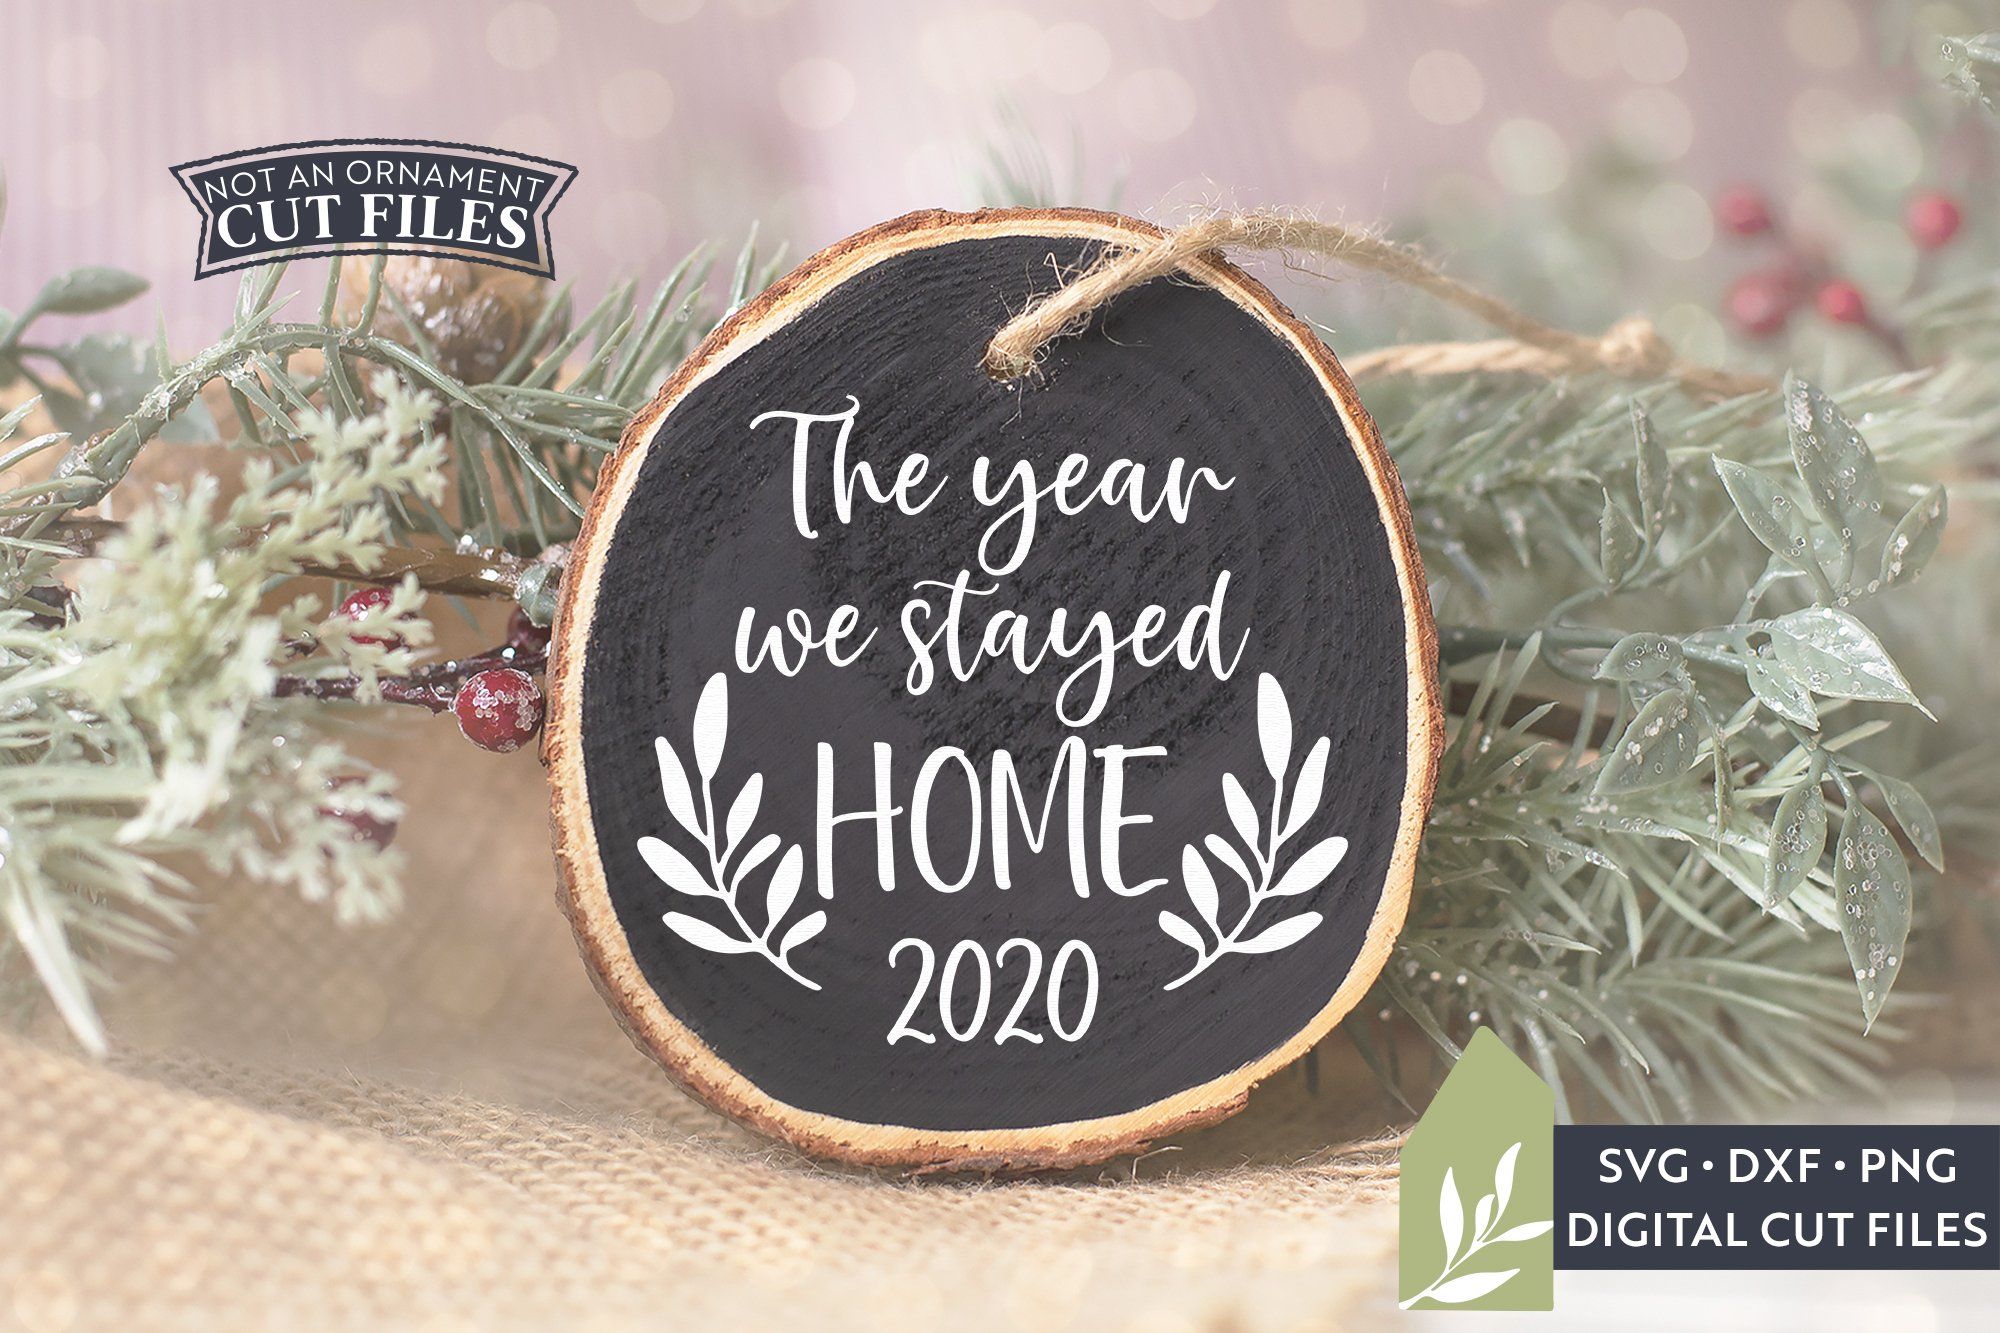 Download The Year We Stayed Home Svg Files 2020 Christmas Ornament Svg So Fontsy